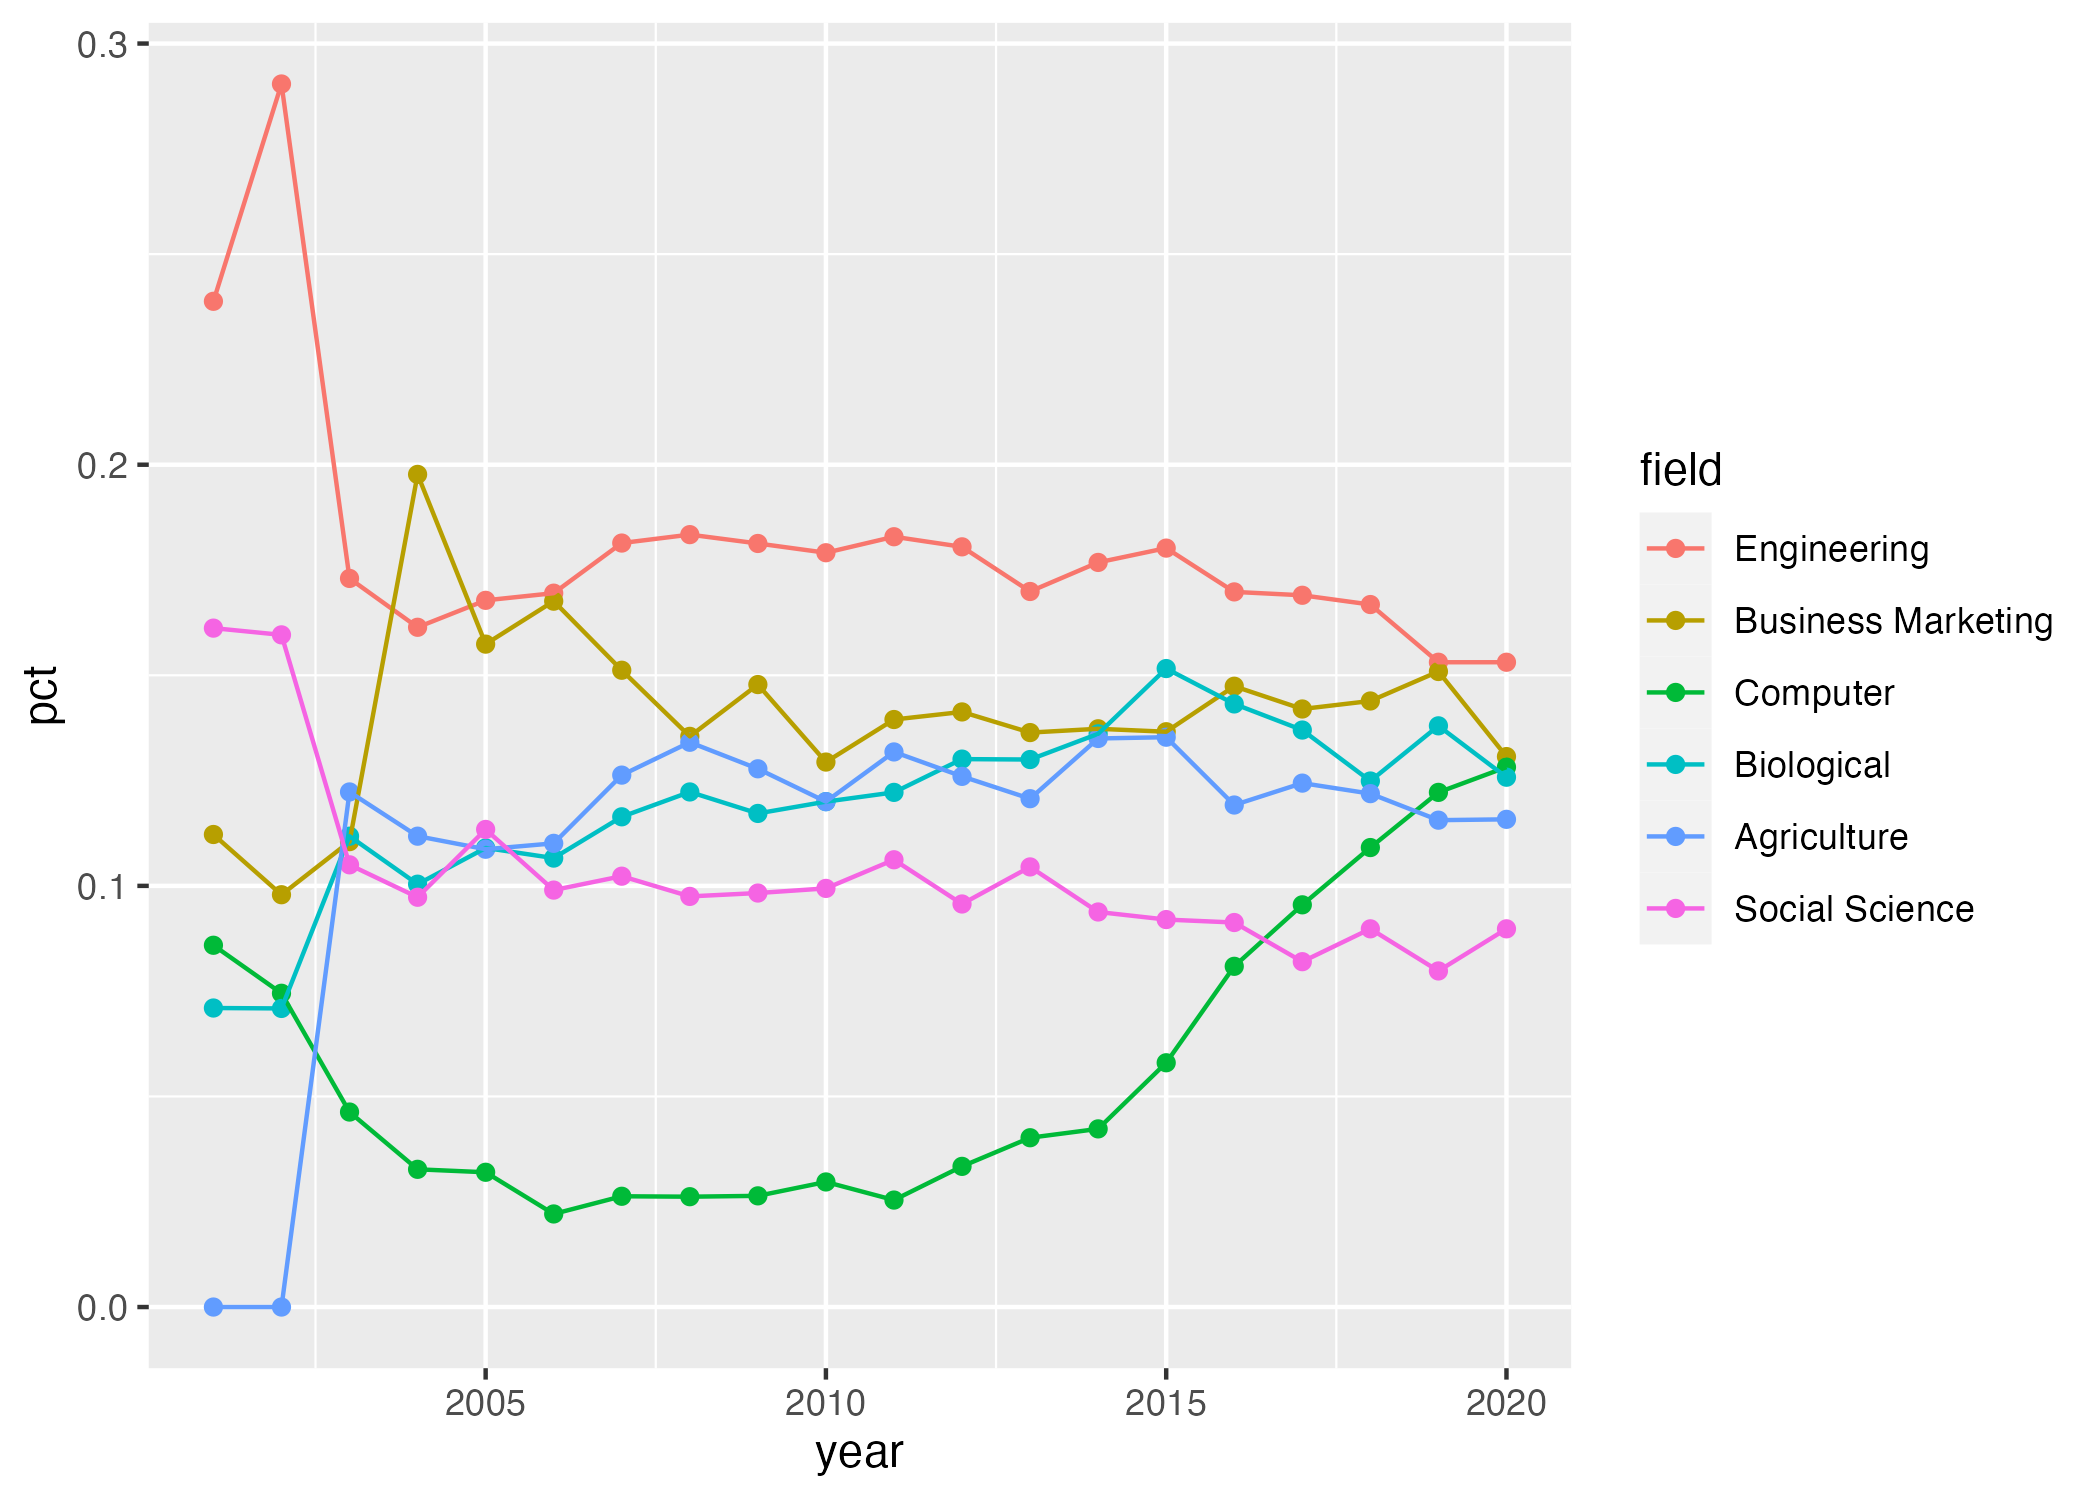 Line plot of numbers of Cornell degrees awarded in six fields of study from 2001 to 2020.